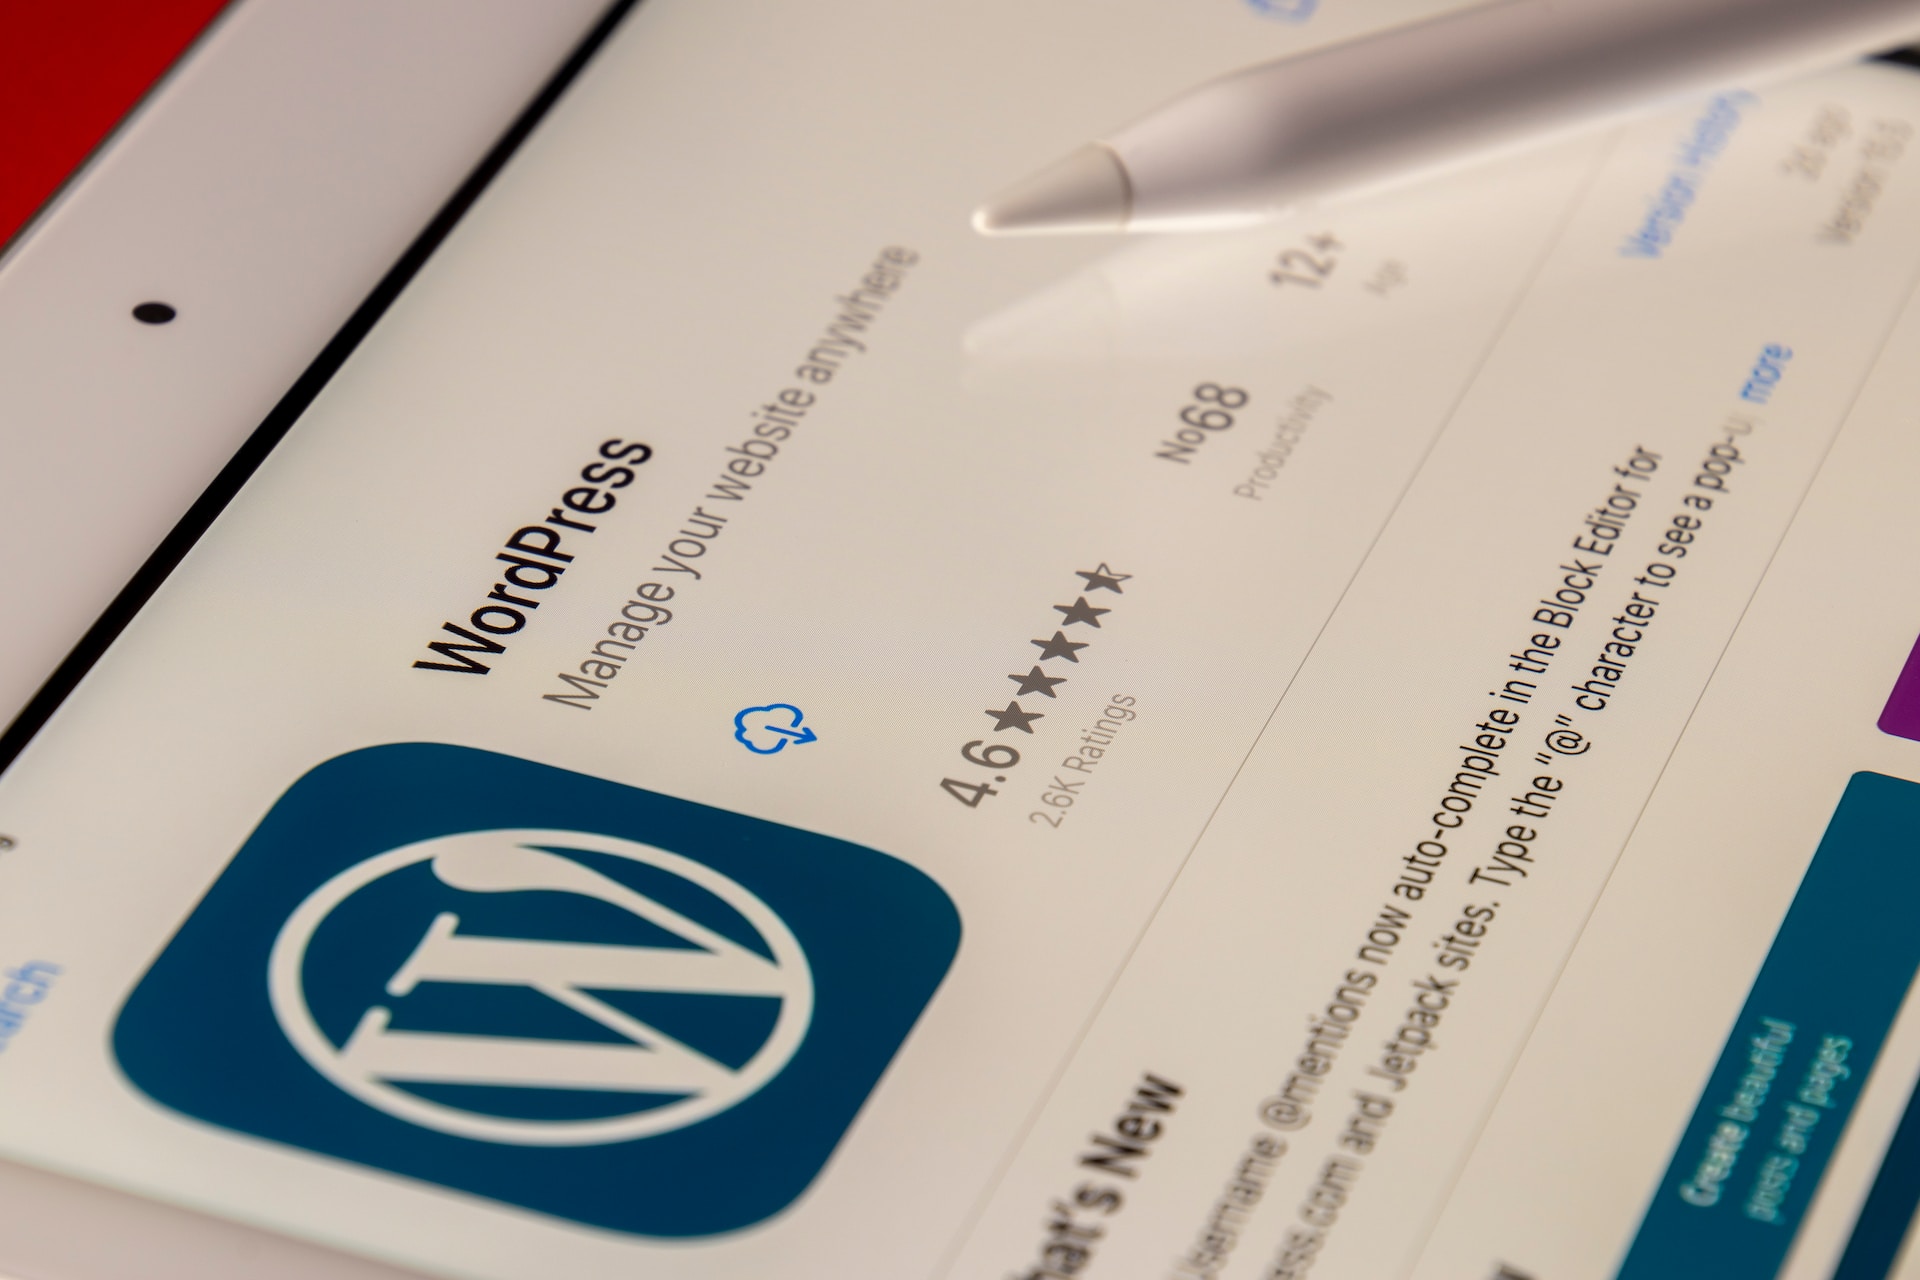 What Are The Benefits Of Using WordPress To Structure Your Website?